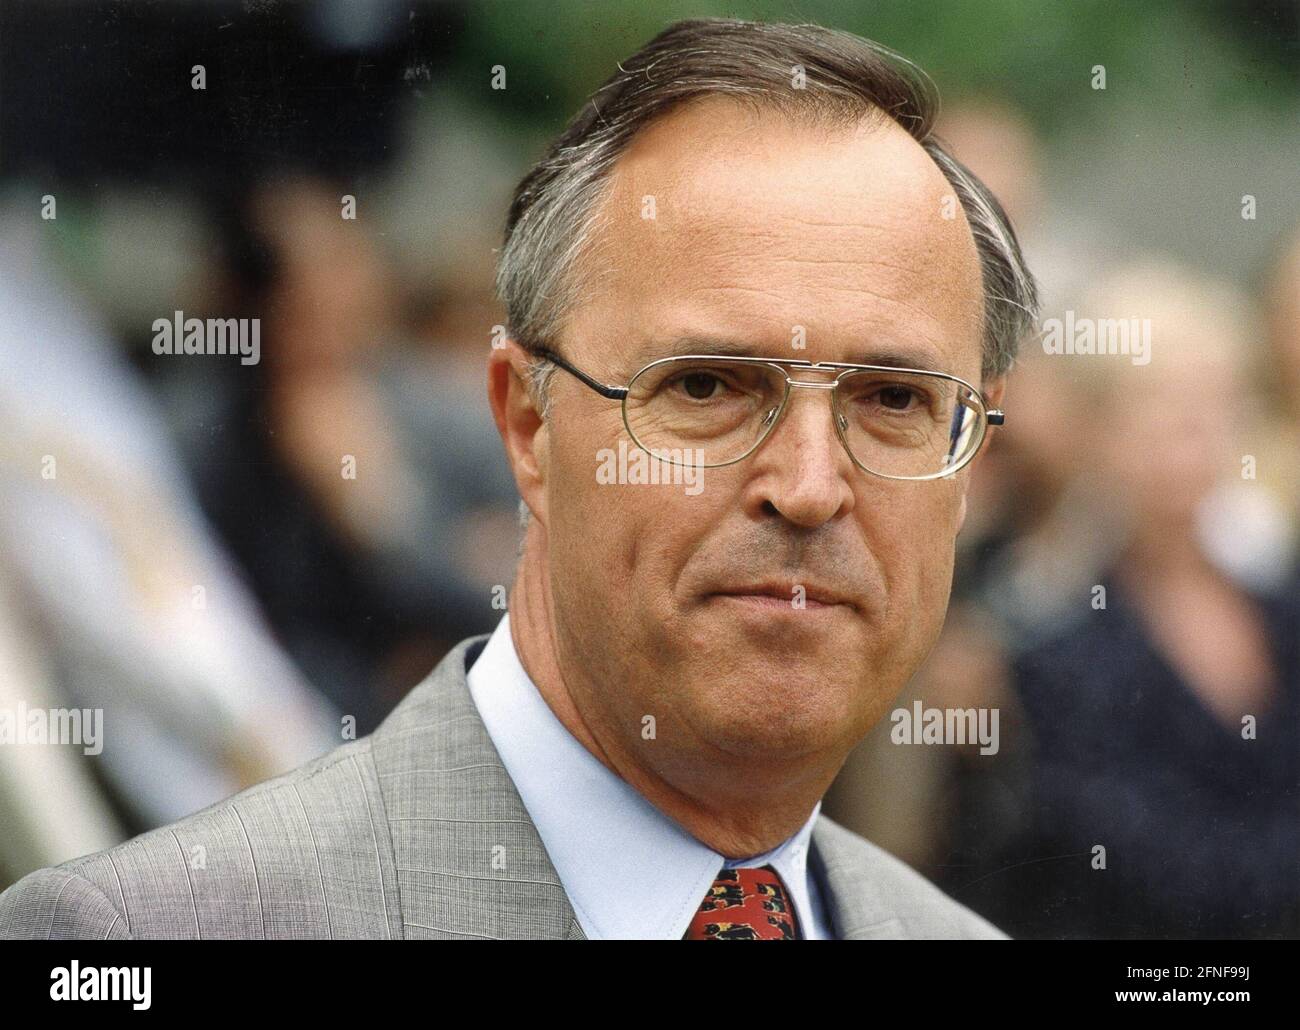 Date of recording: 15.07.1999 Hans Eichel, Federal Minister of Finance. [automated translation] Stock Photo